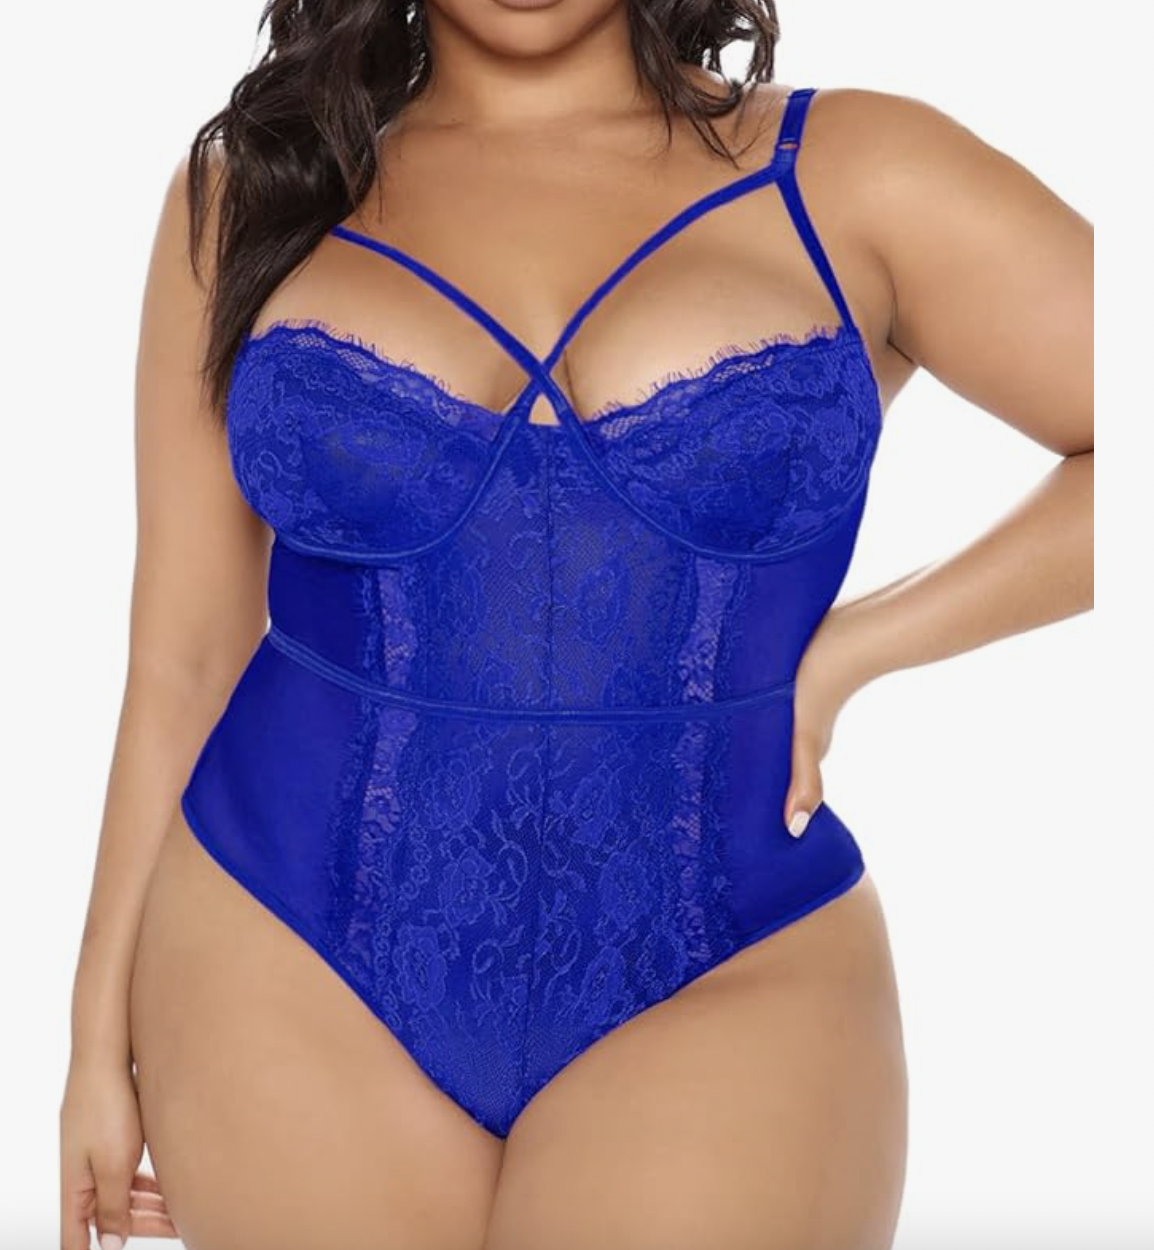 The Best Plus-Size Lingerie Starting At Size 24 - xoNecole